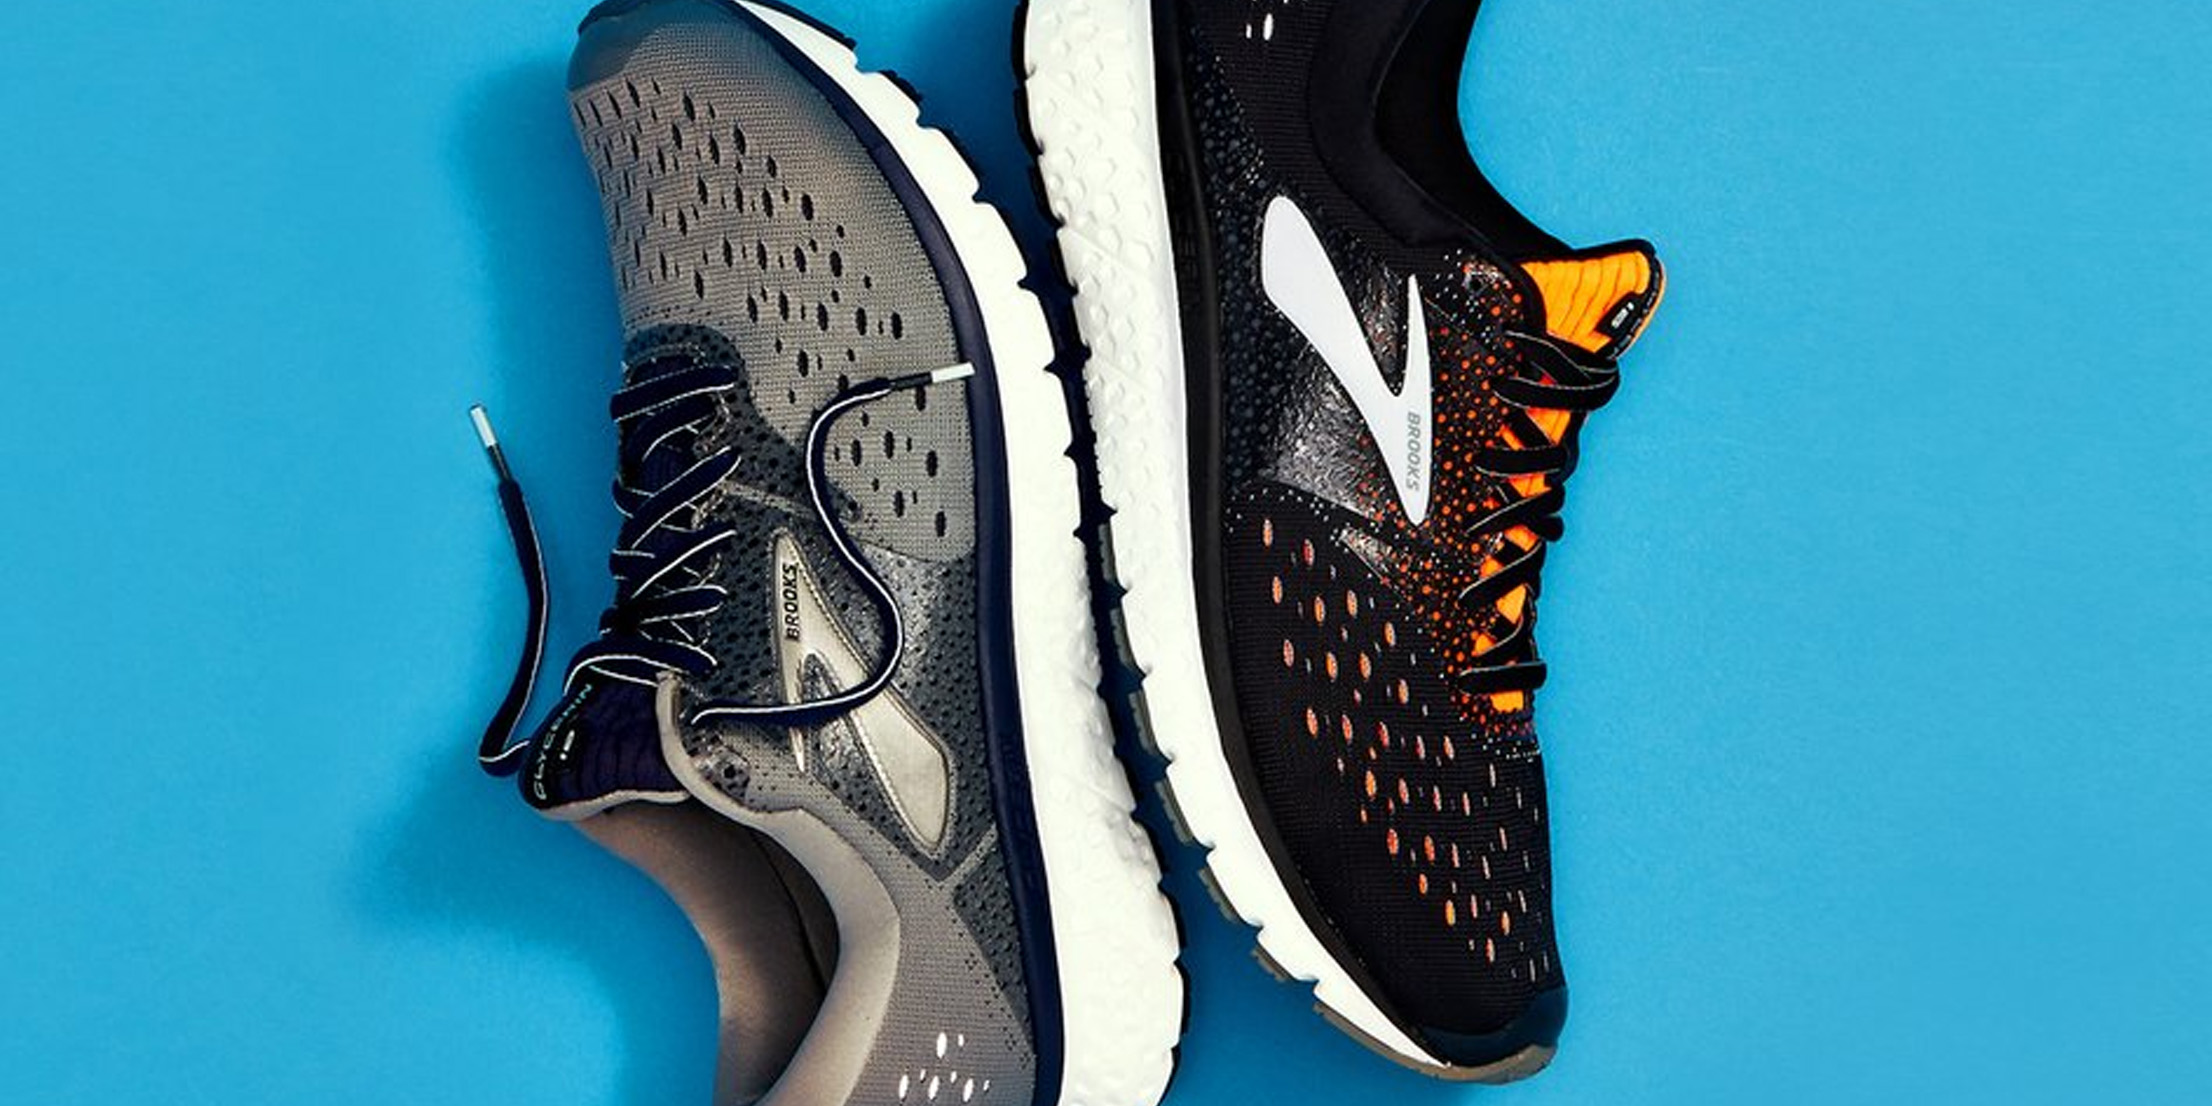 Brooks takes up to 50 off running shoes, trail styles, more + free